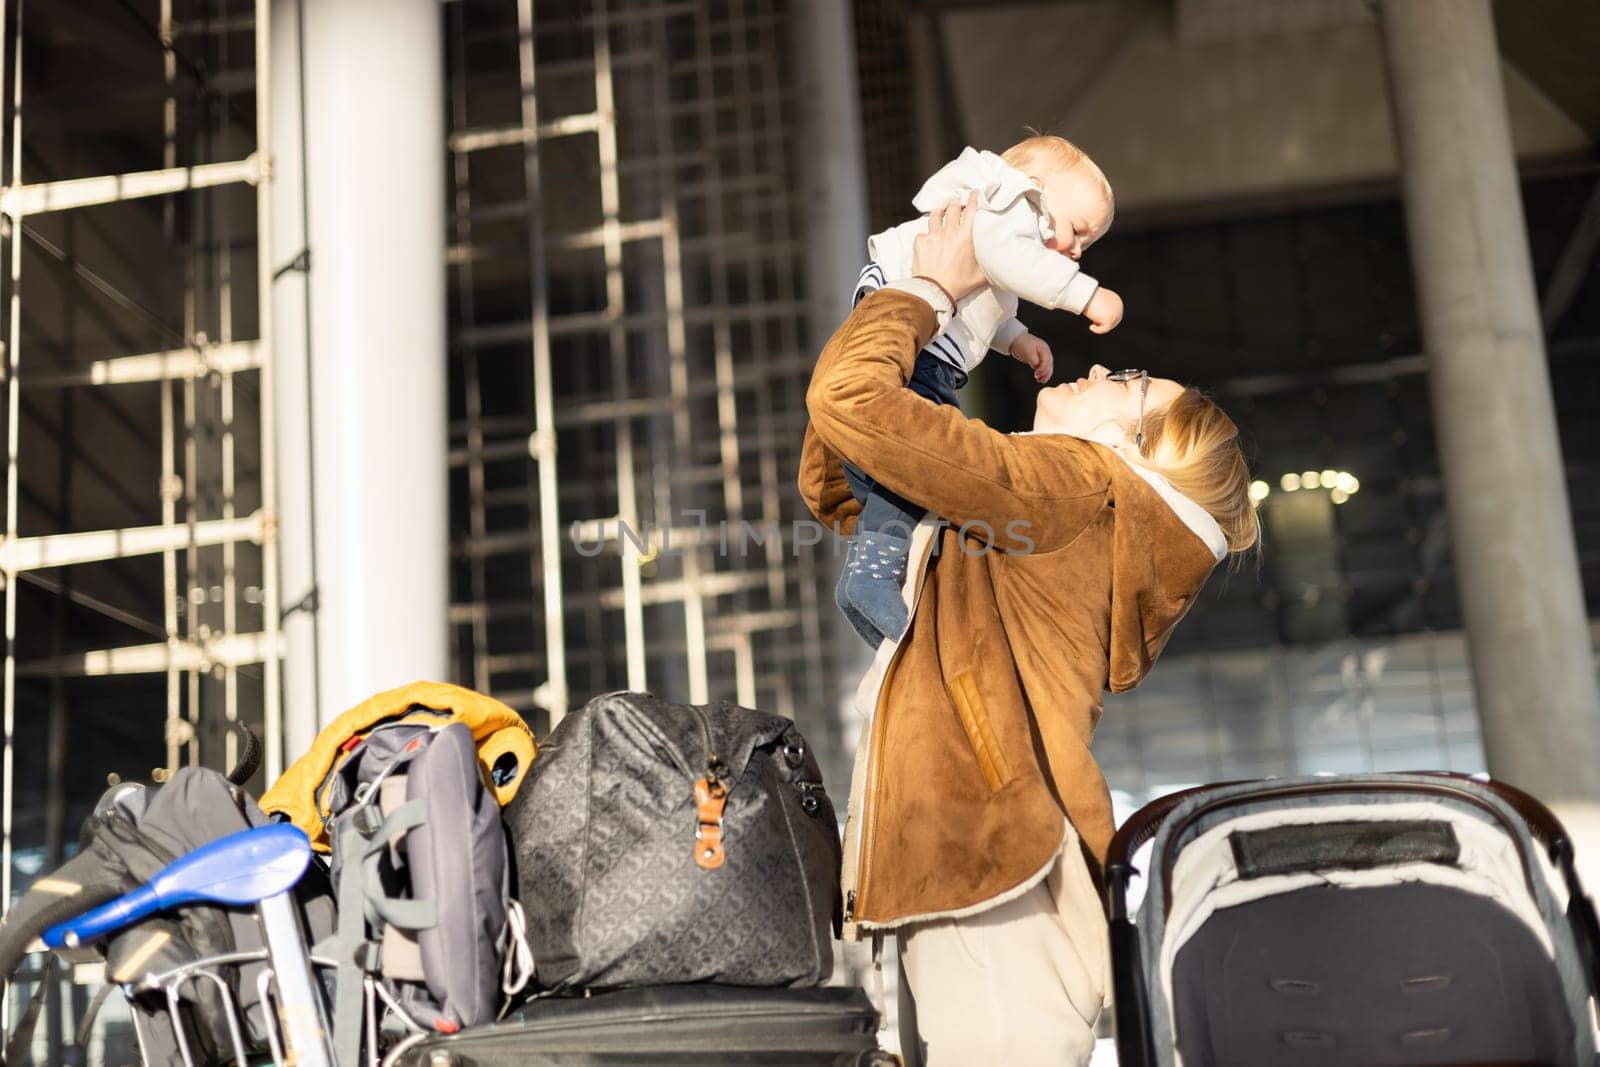 Motherat happily holding and lifting his infant baby boy child in the air after being rejunited in front of airport terminal station. Baby travel concept. by kasto